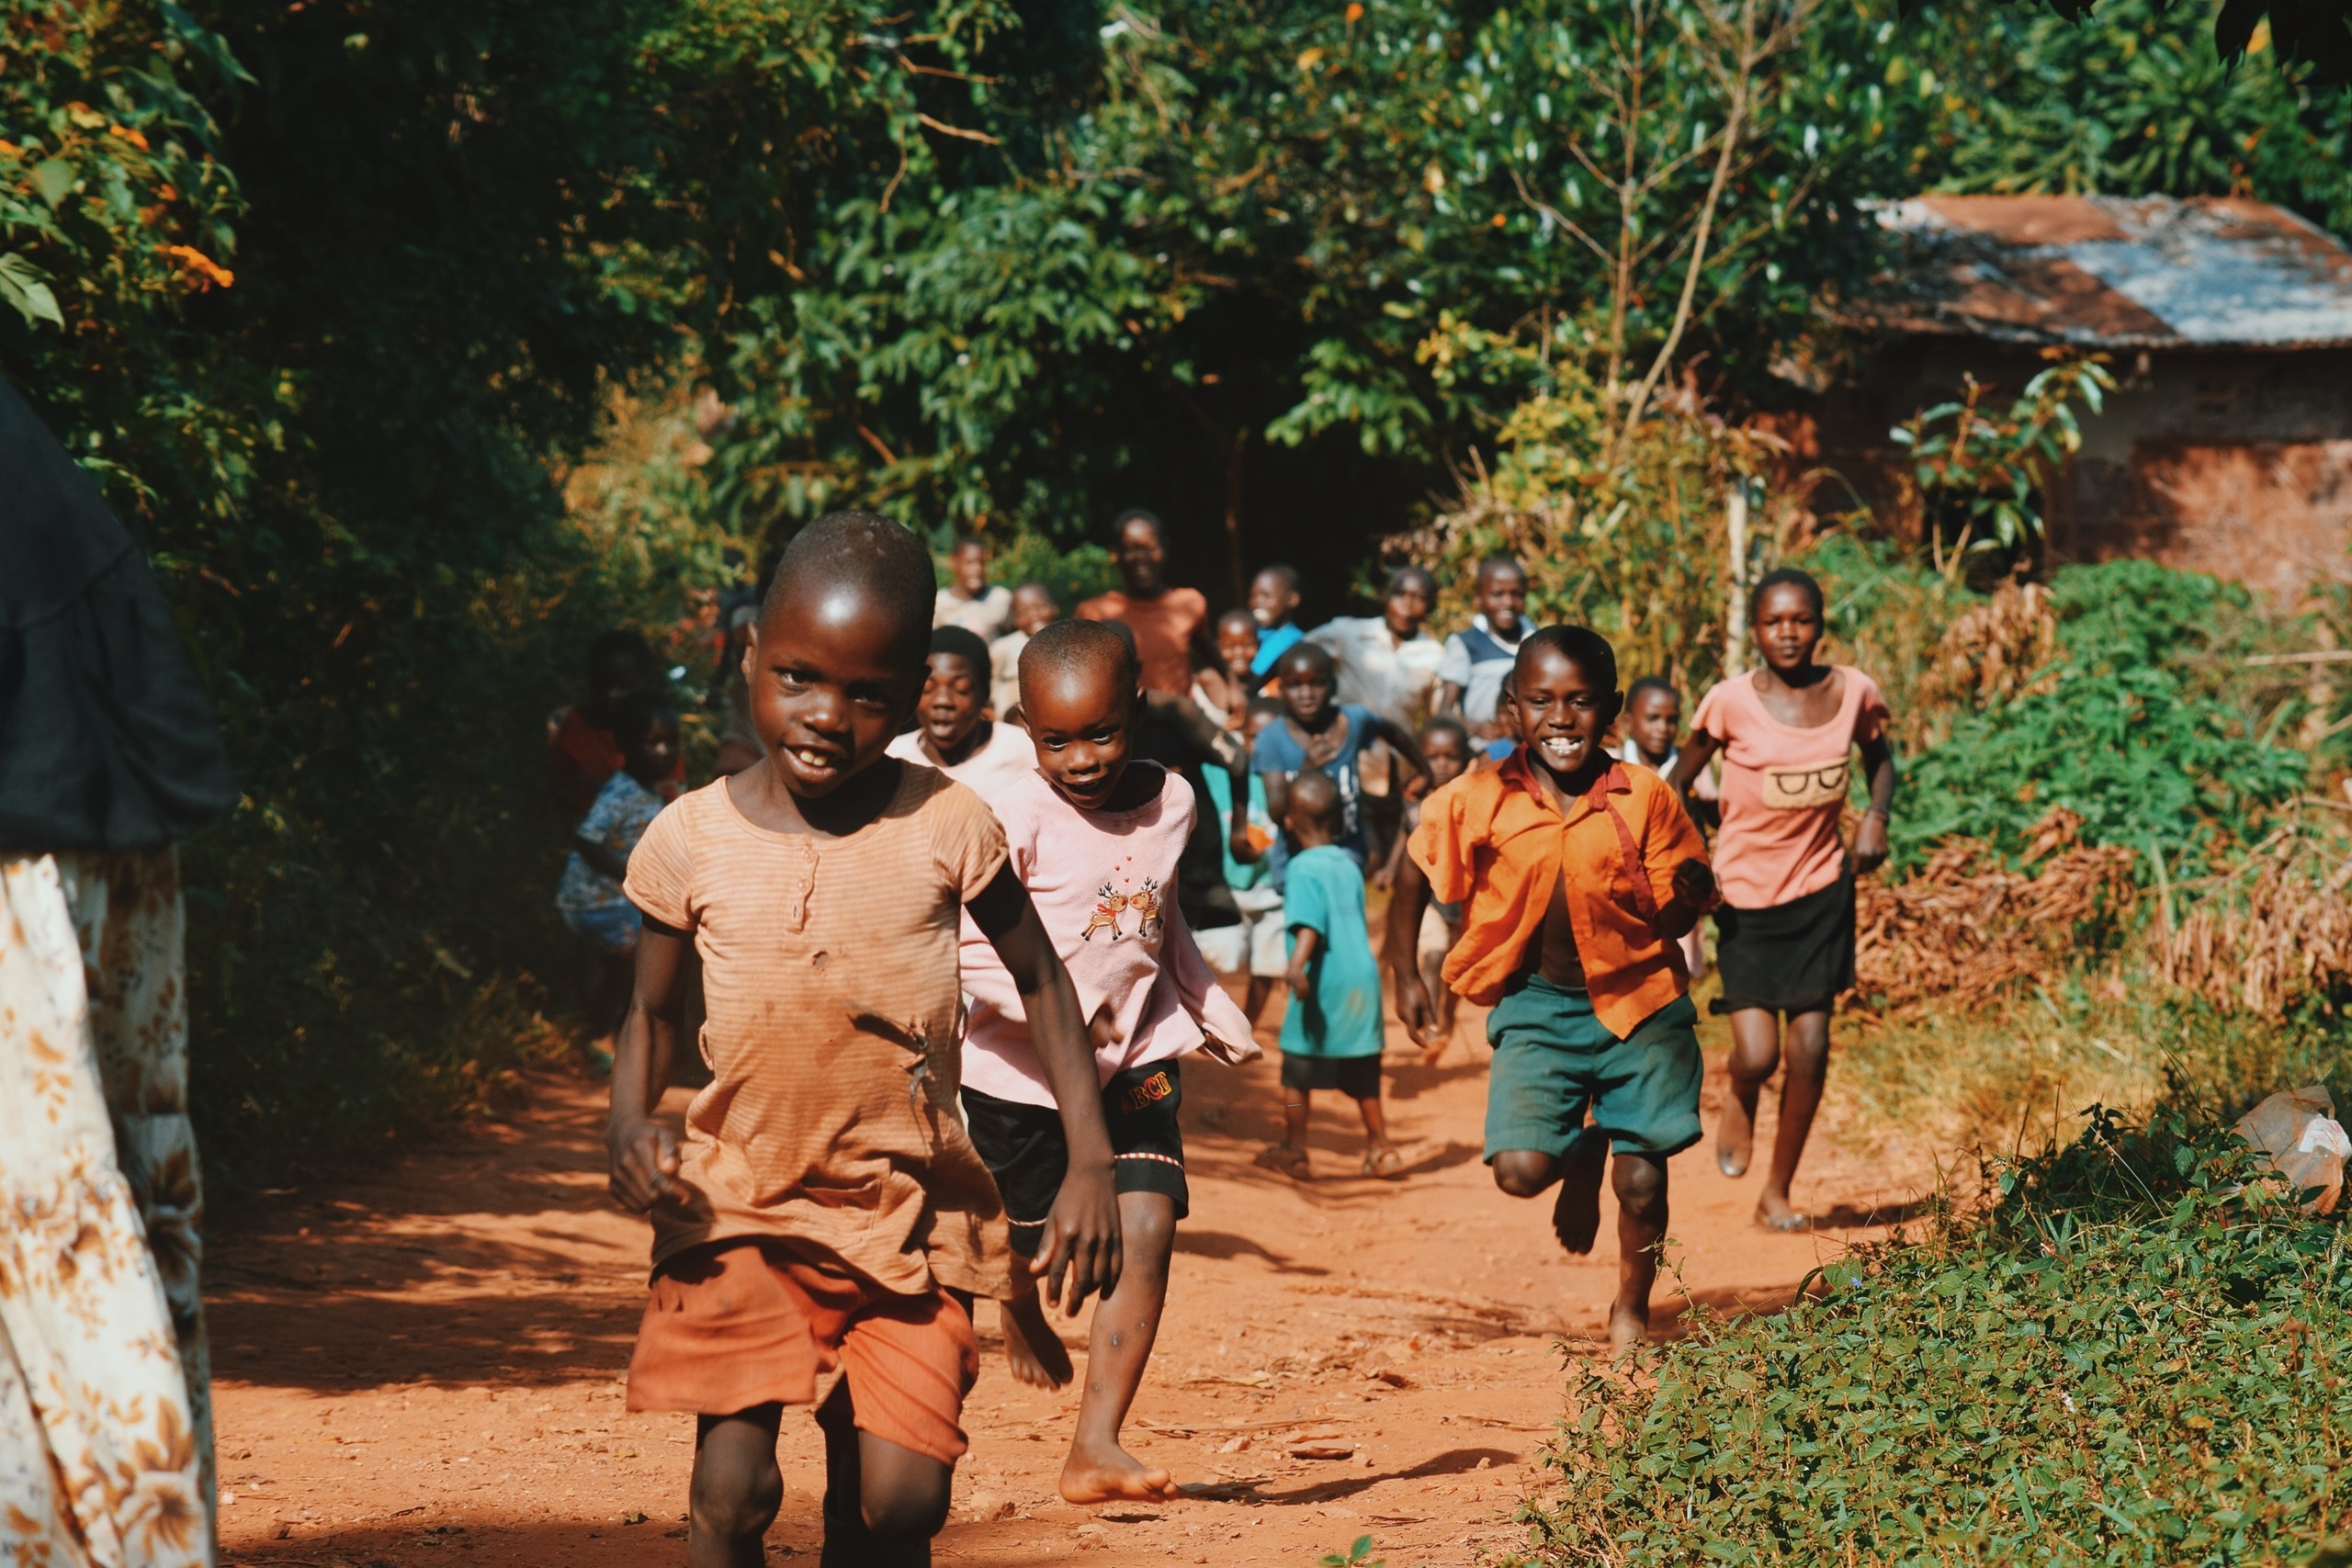 African children smiling and walking outside